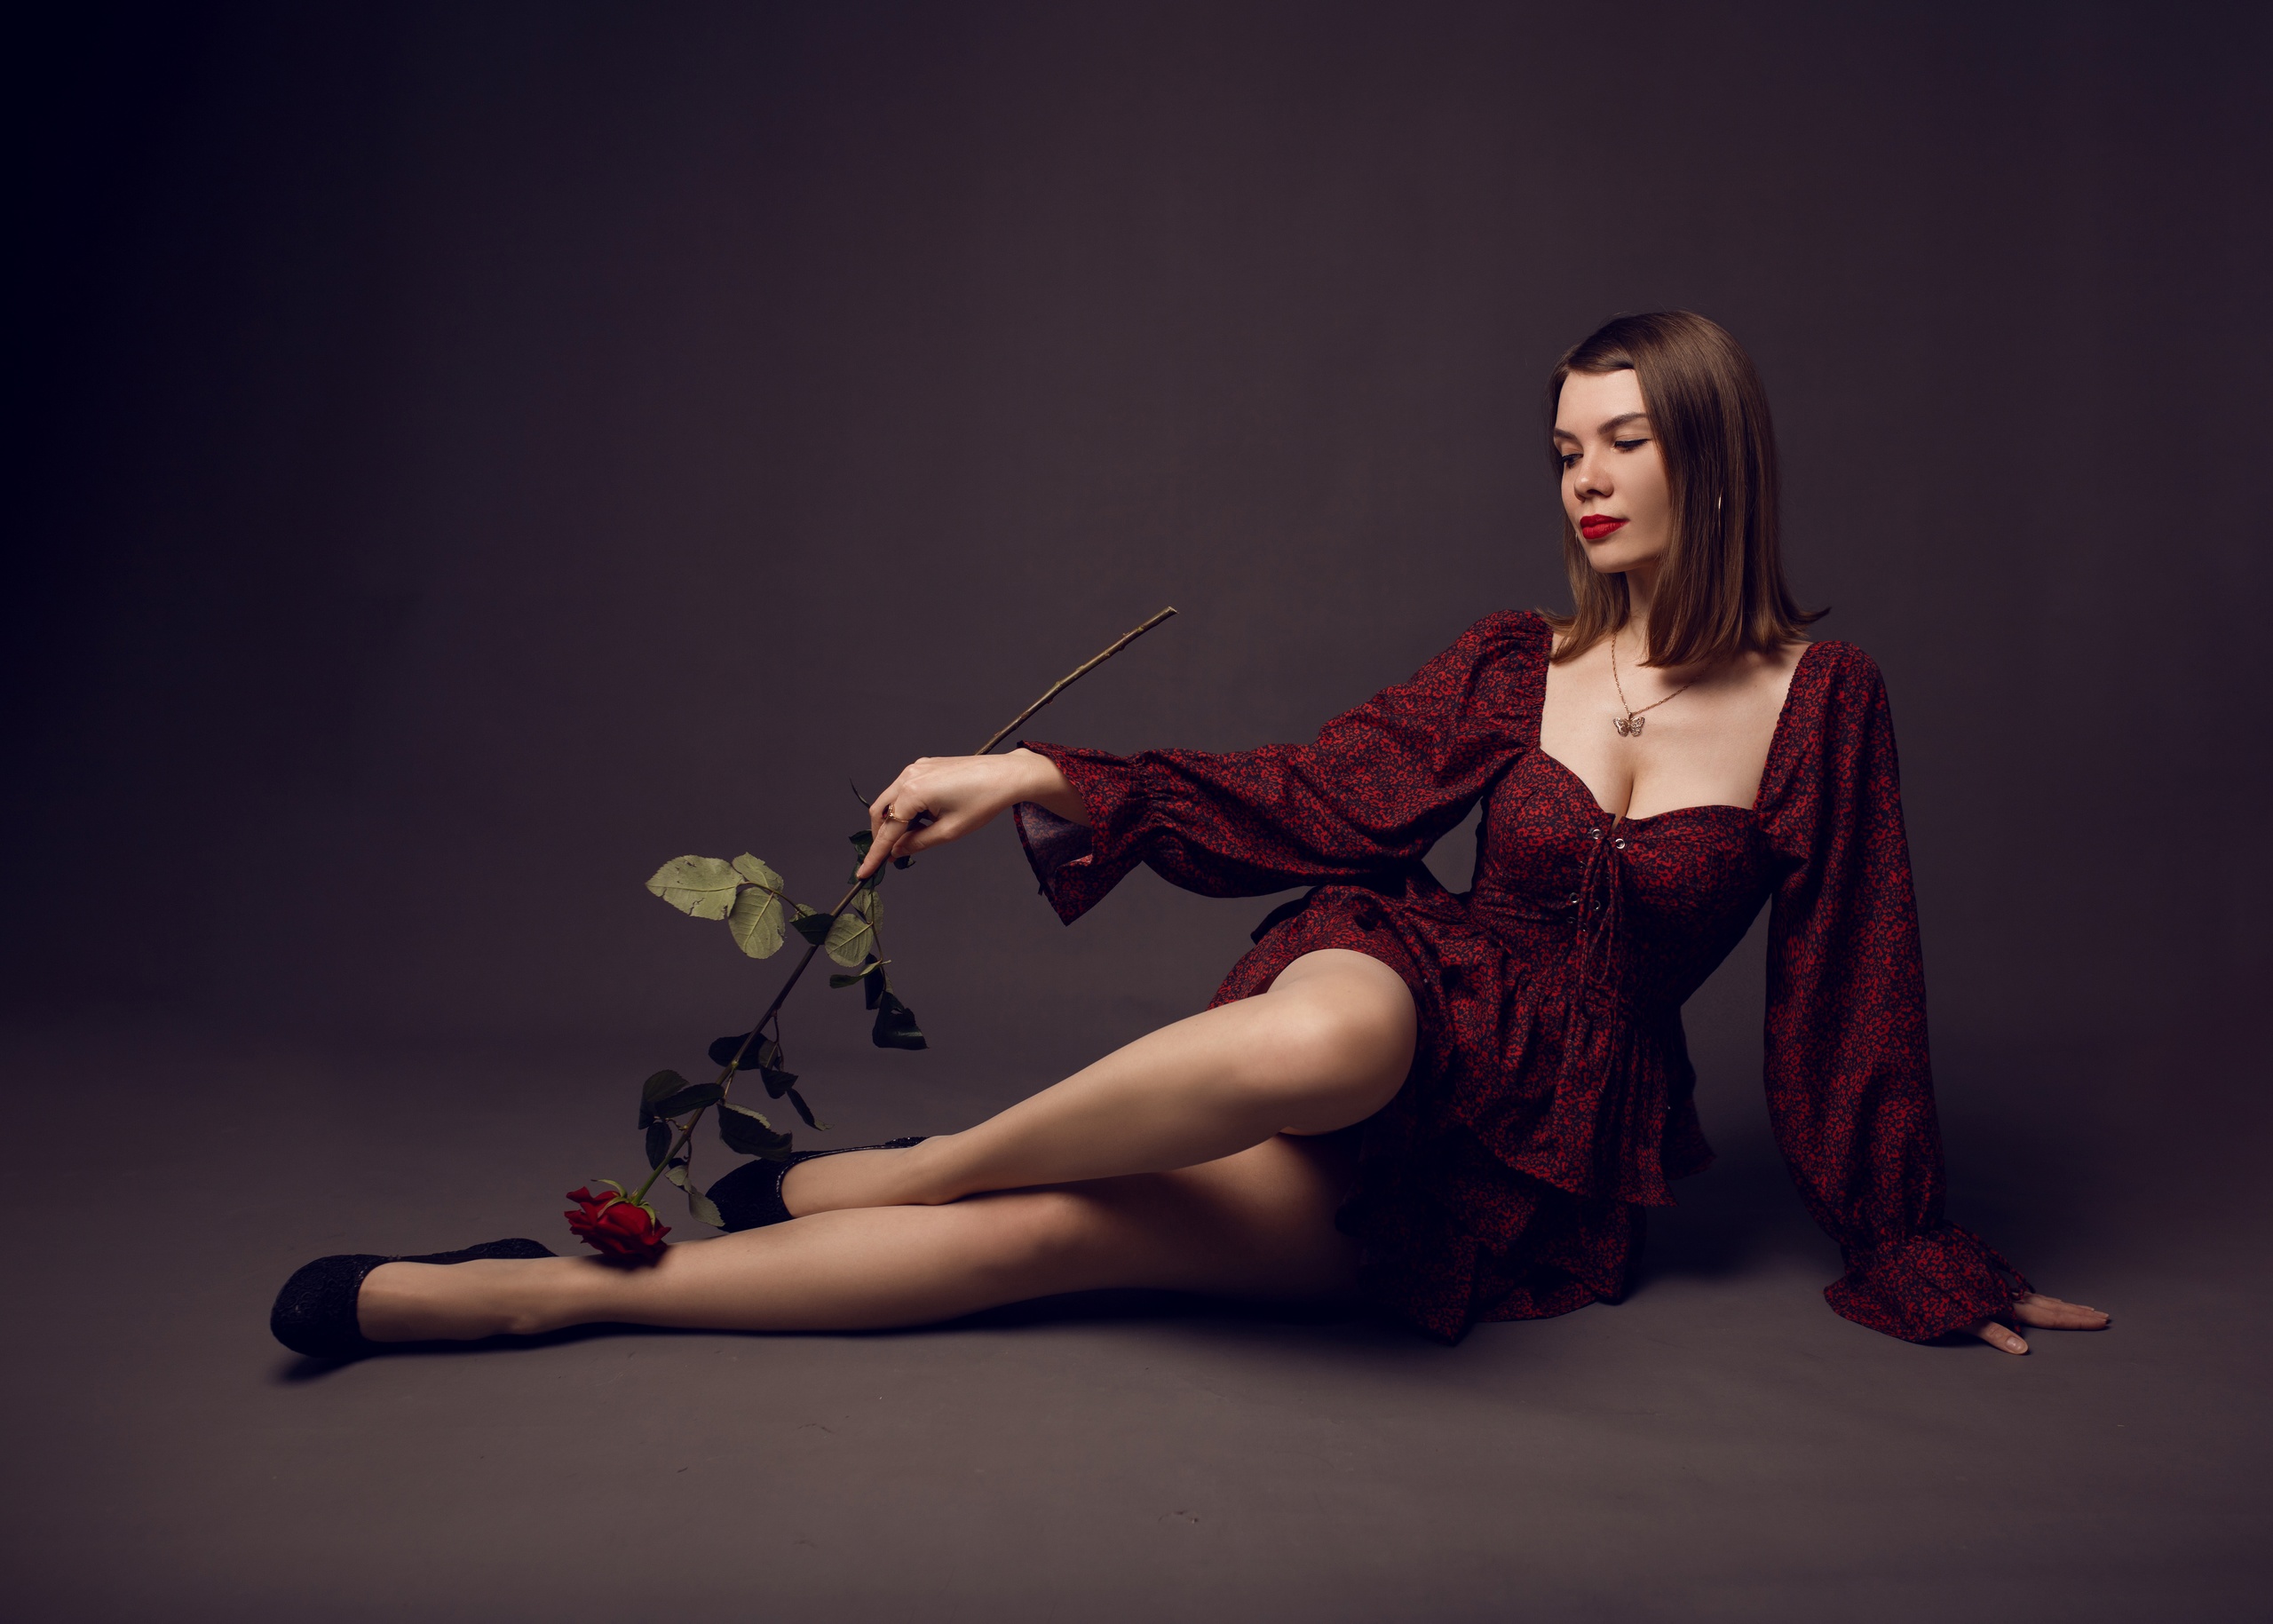 People 2560x1829 Aleksey Lozgachev women makeup dress rose studio simple background model brunette red lipstick cleavage necklace red dress legs flowers gray background